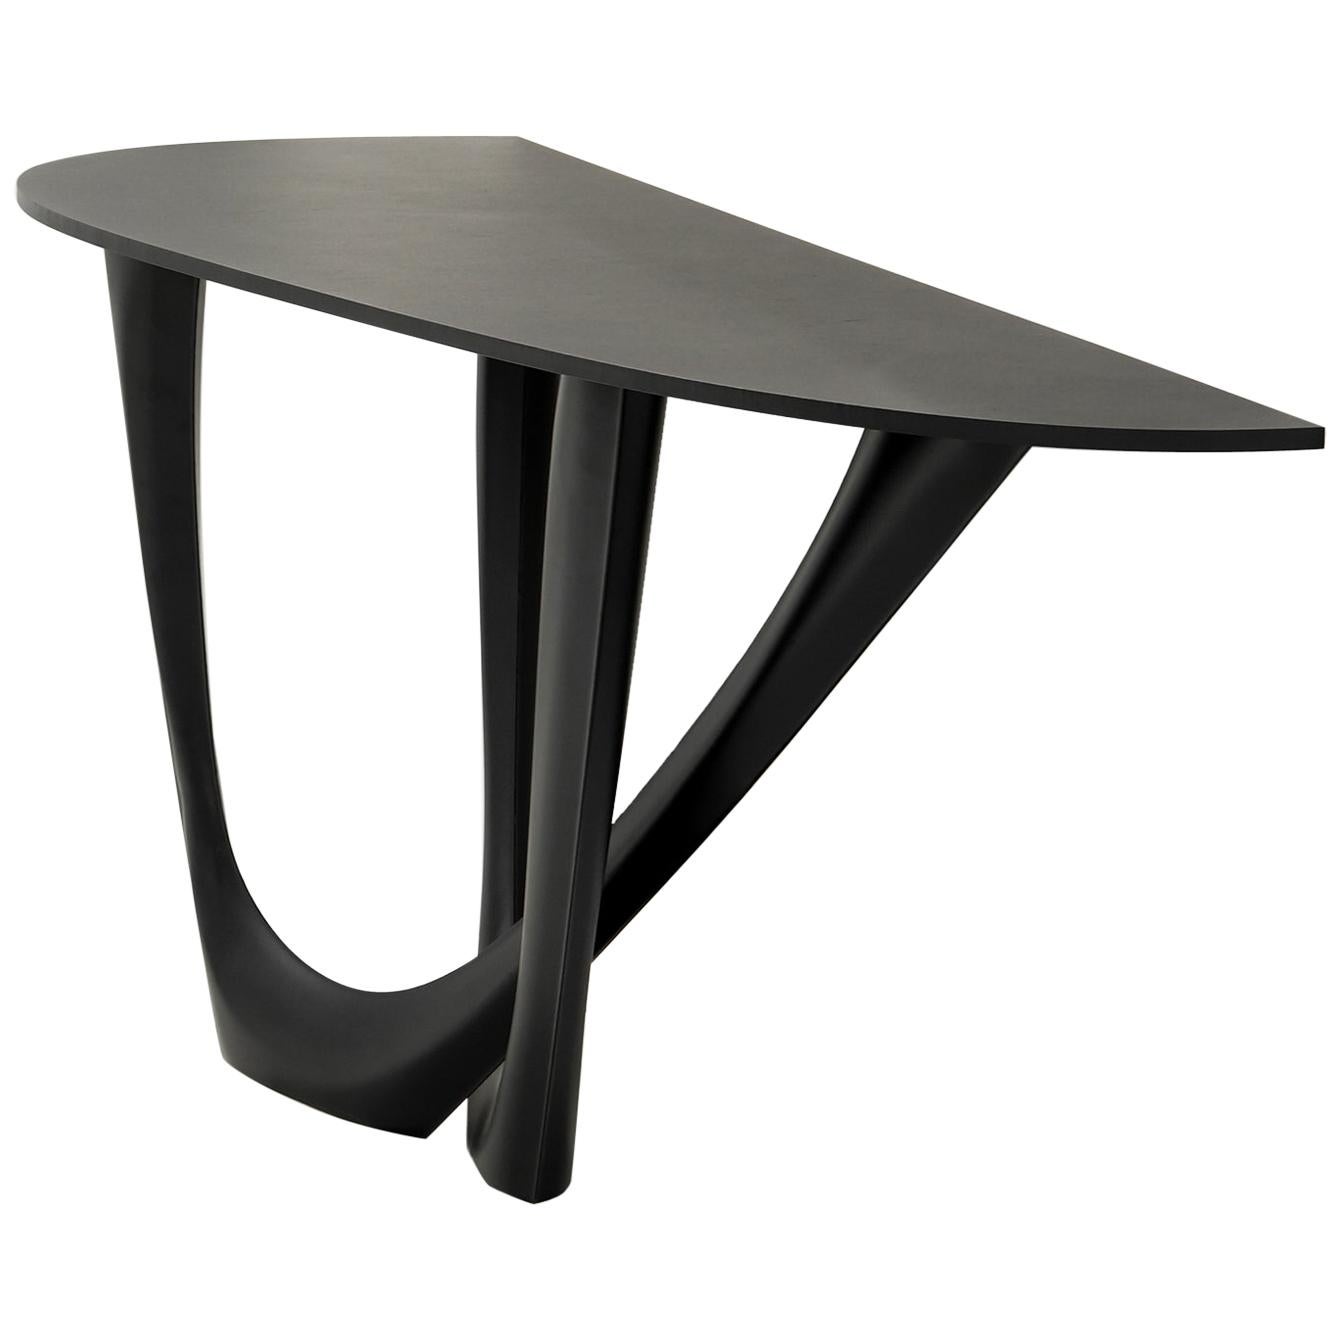 G-Console Table Duo in Powder-Coated Steel Base and Top by Zieta